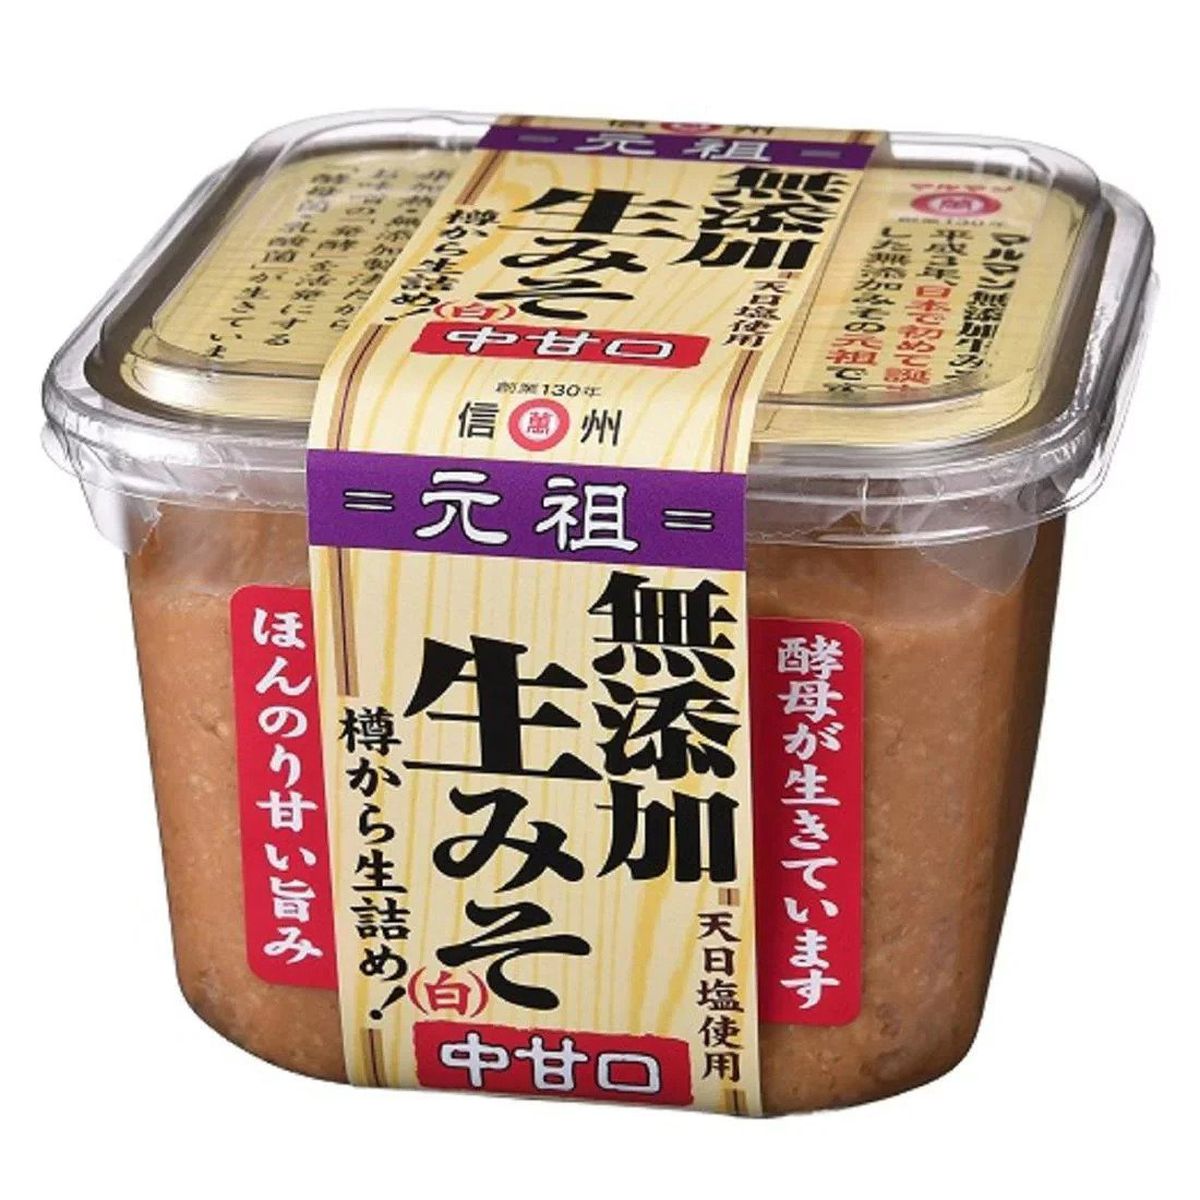 A container of white miso paste